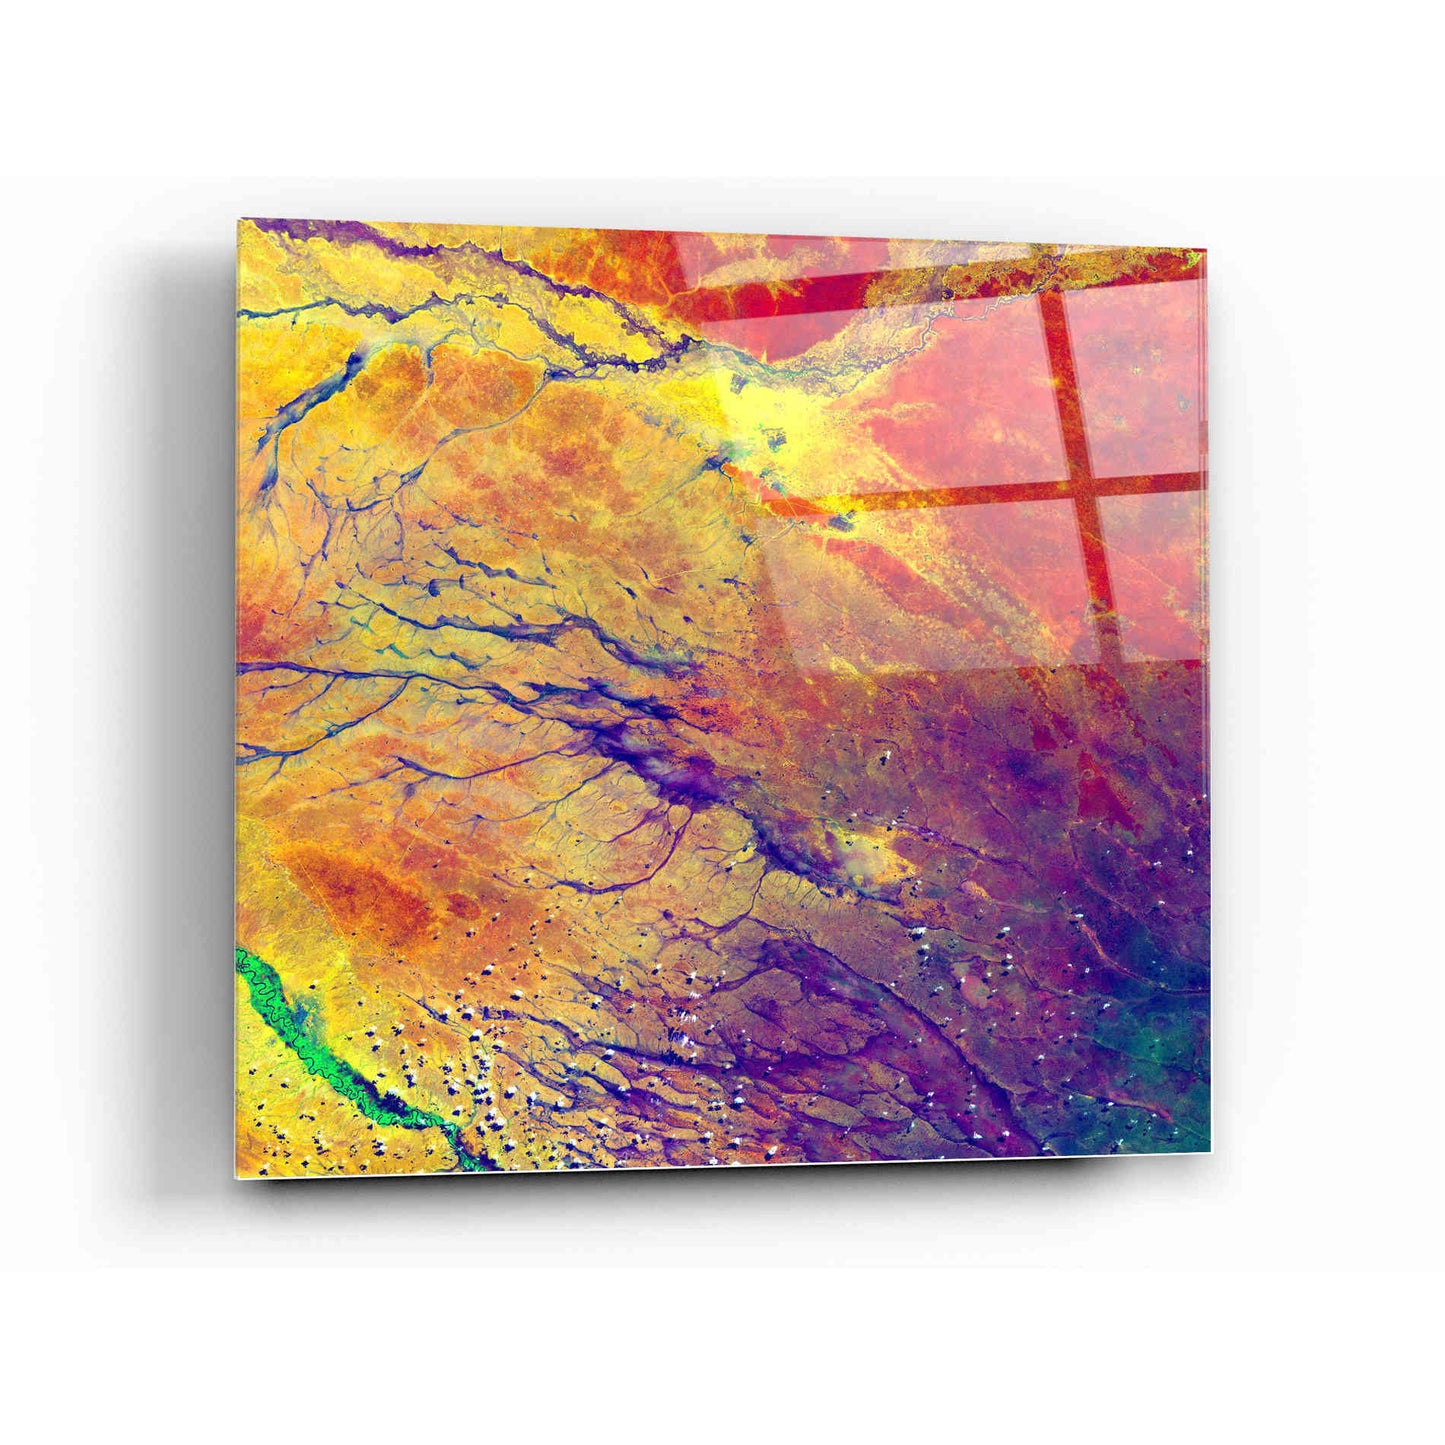 Epic Art 'Earth As Art: A Study in Color' Acrylic Glass Wall Art,12x12